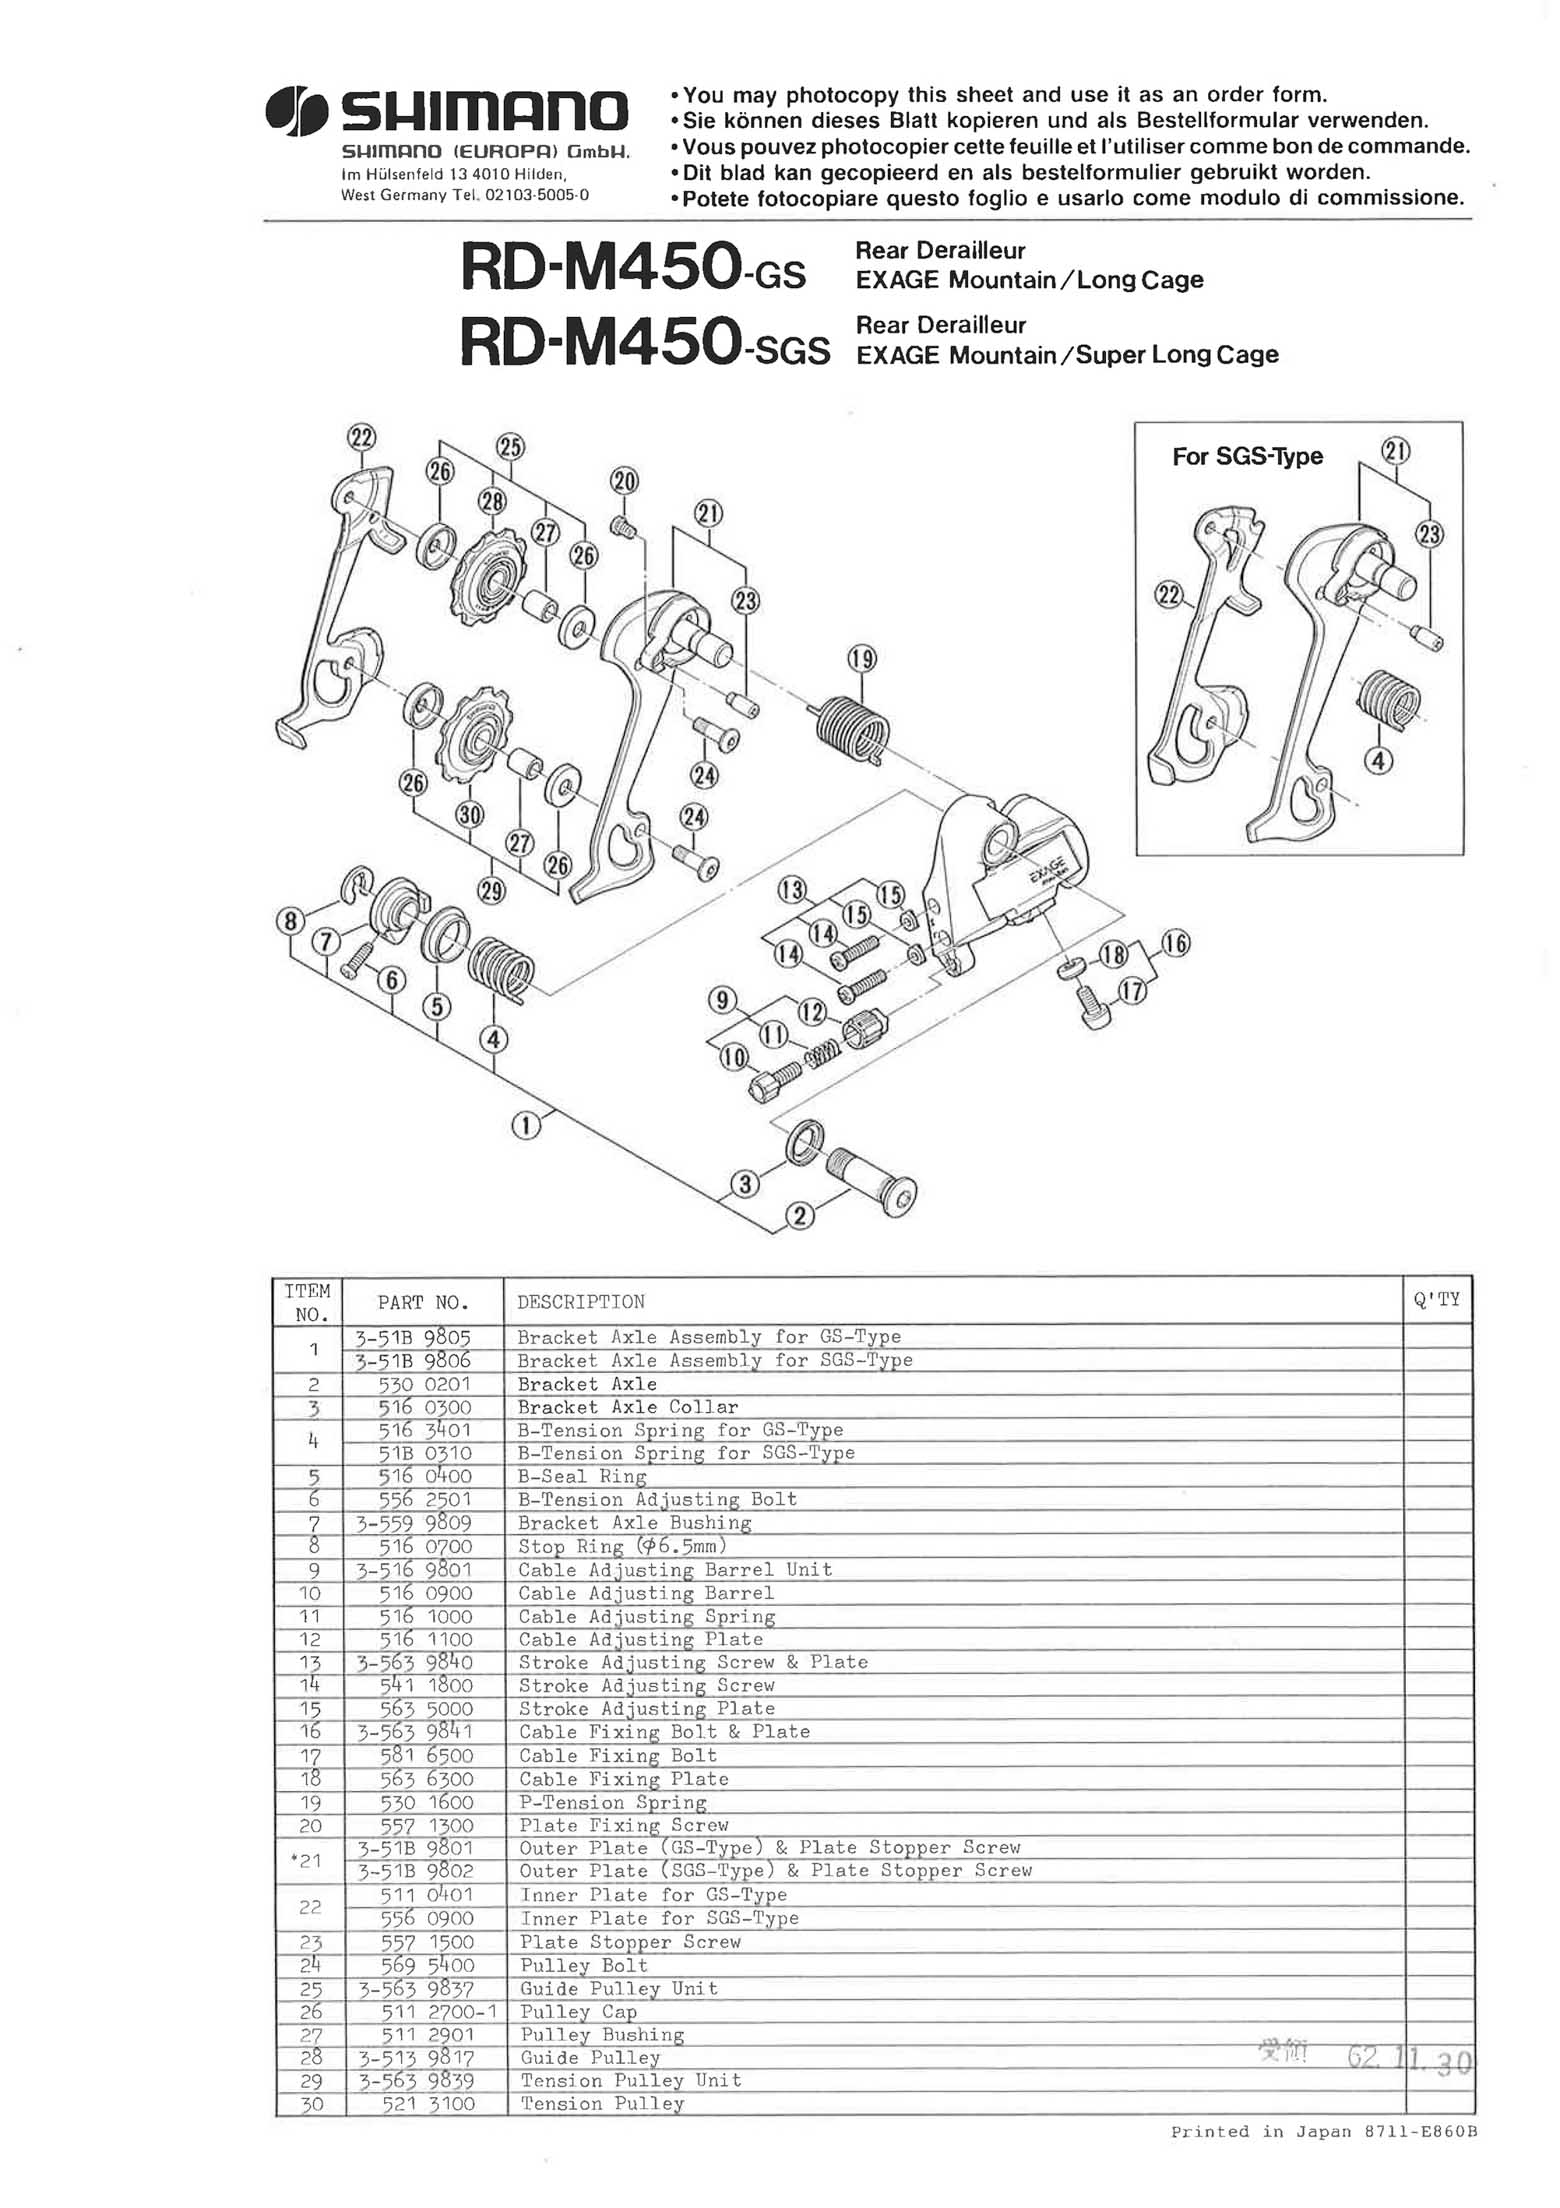 Shimano web site 2020 - exploded views from 1987 Exage Mountain (M450) 2nd version main image